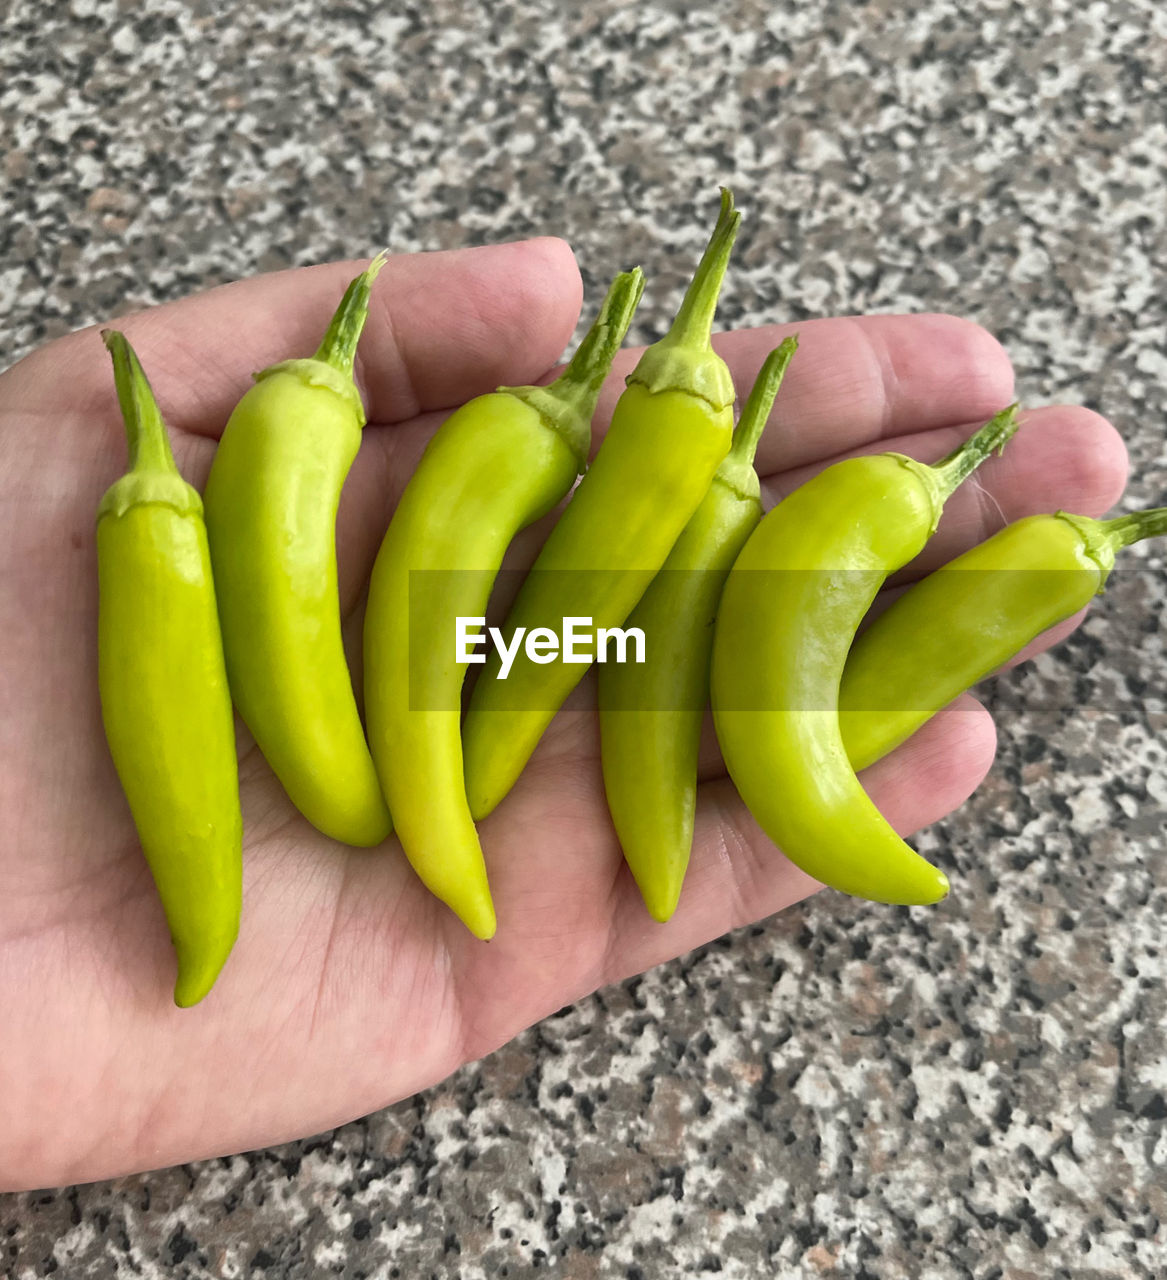 food and drink, food, healthy eating, produce, vegetable, freshness, wellbeing, hand, plant, high angle view, green, one person, day, holding, fruit, close-up, yellow, organic, chili pepper, raw food, outdoors